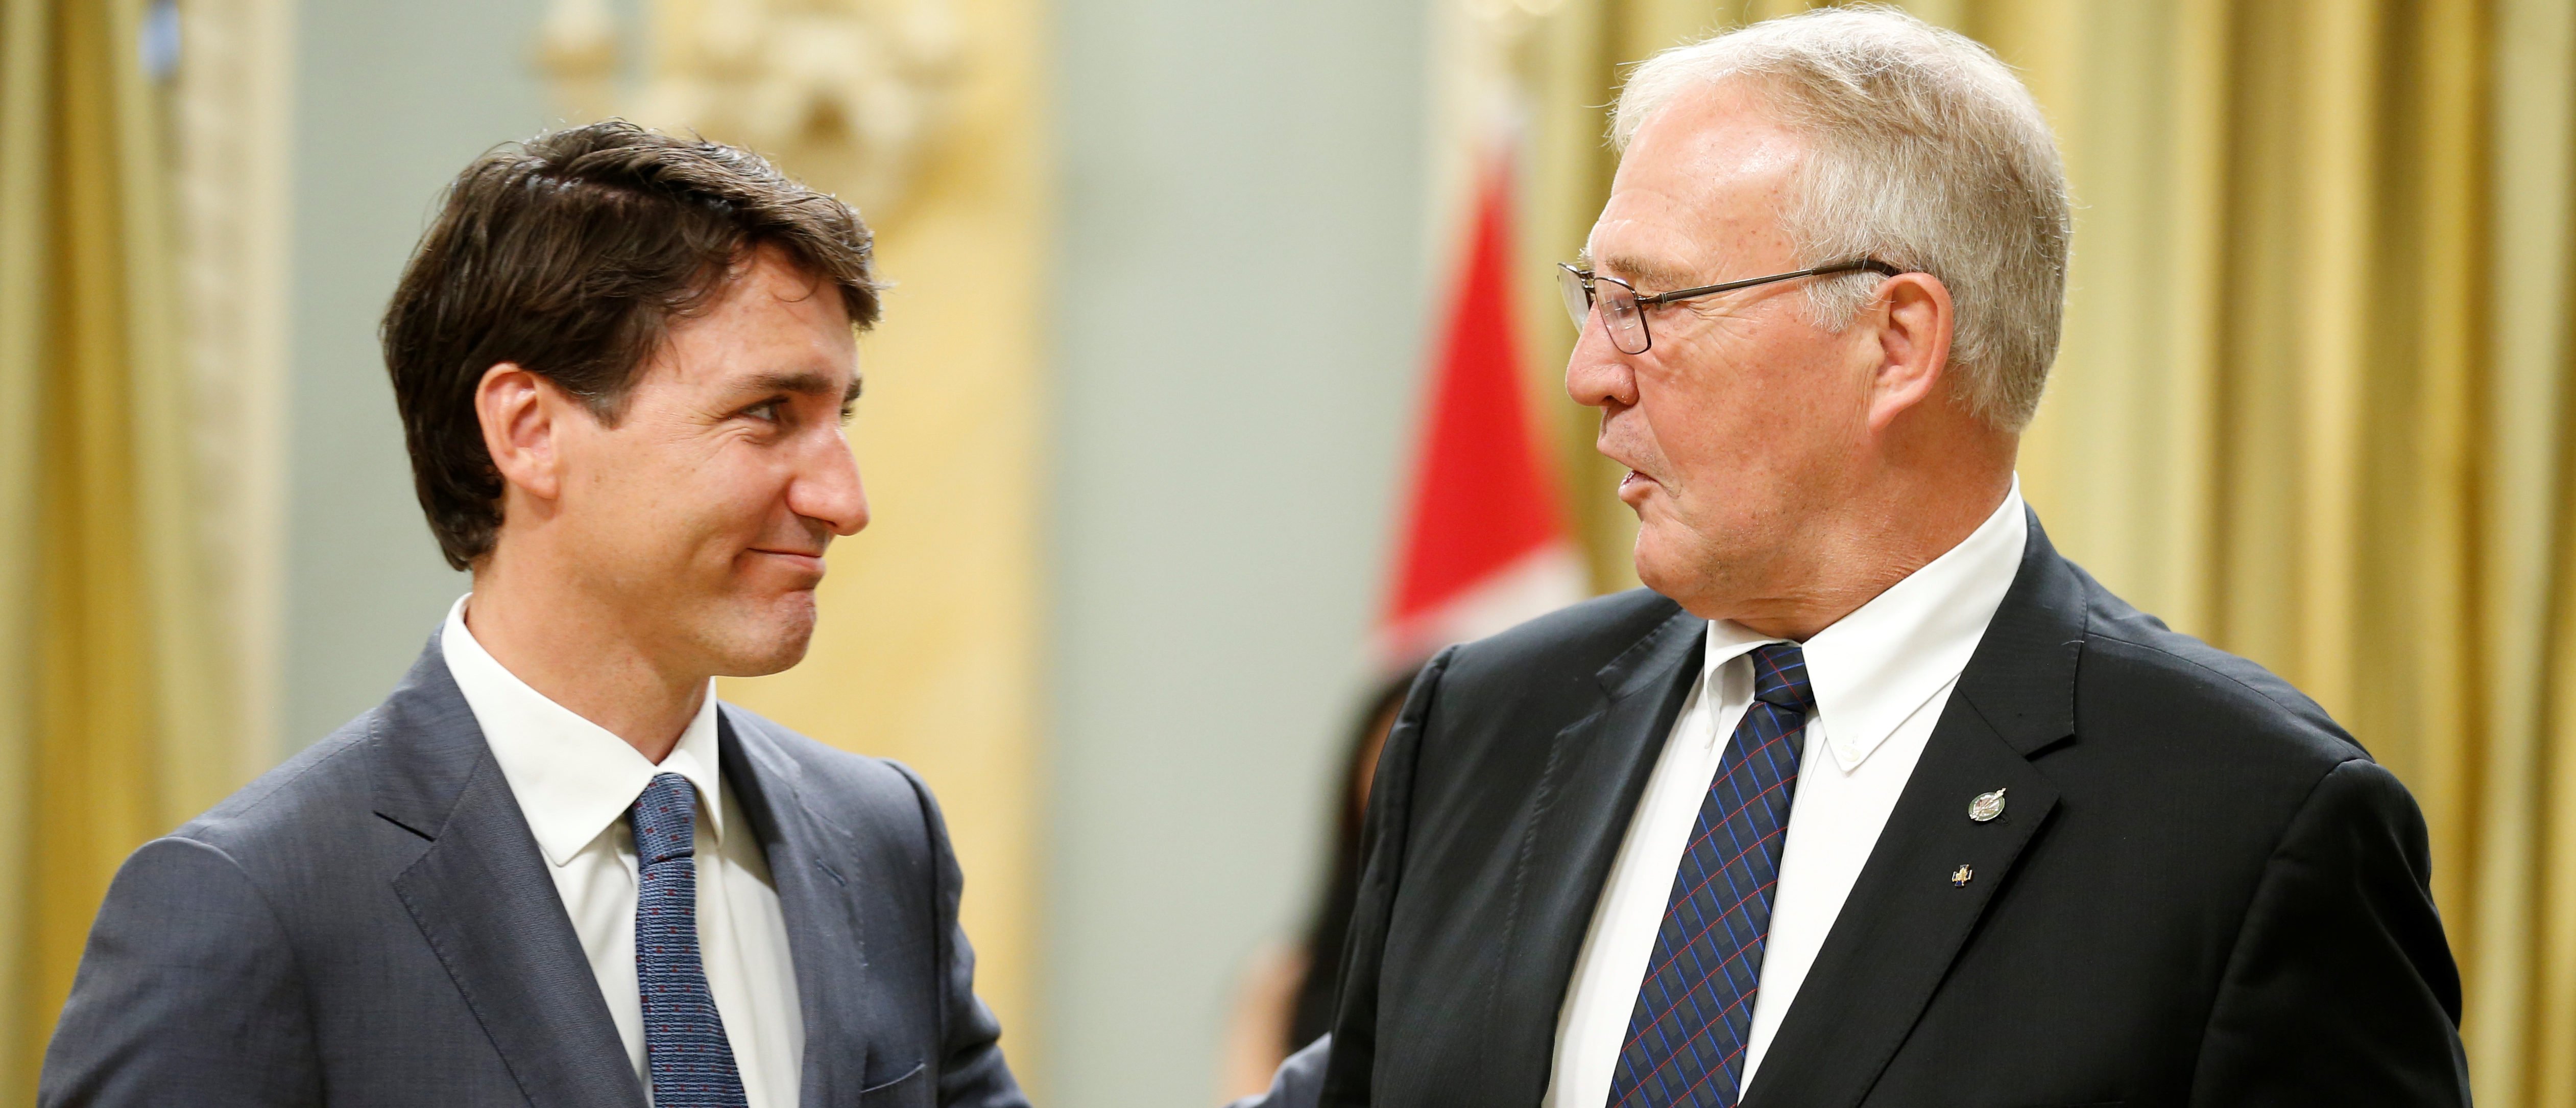 Canada's Prime Minister Justin Trudeau congratulates Bill Blair after he was sworn-in as Minister of Border Security and Organized Crime Reduction during a cabinet shuffle at Rideau Hall in Ottawa, Ontario, Canada, July 18, 2018. REUTERS/Chris Wattie